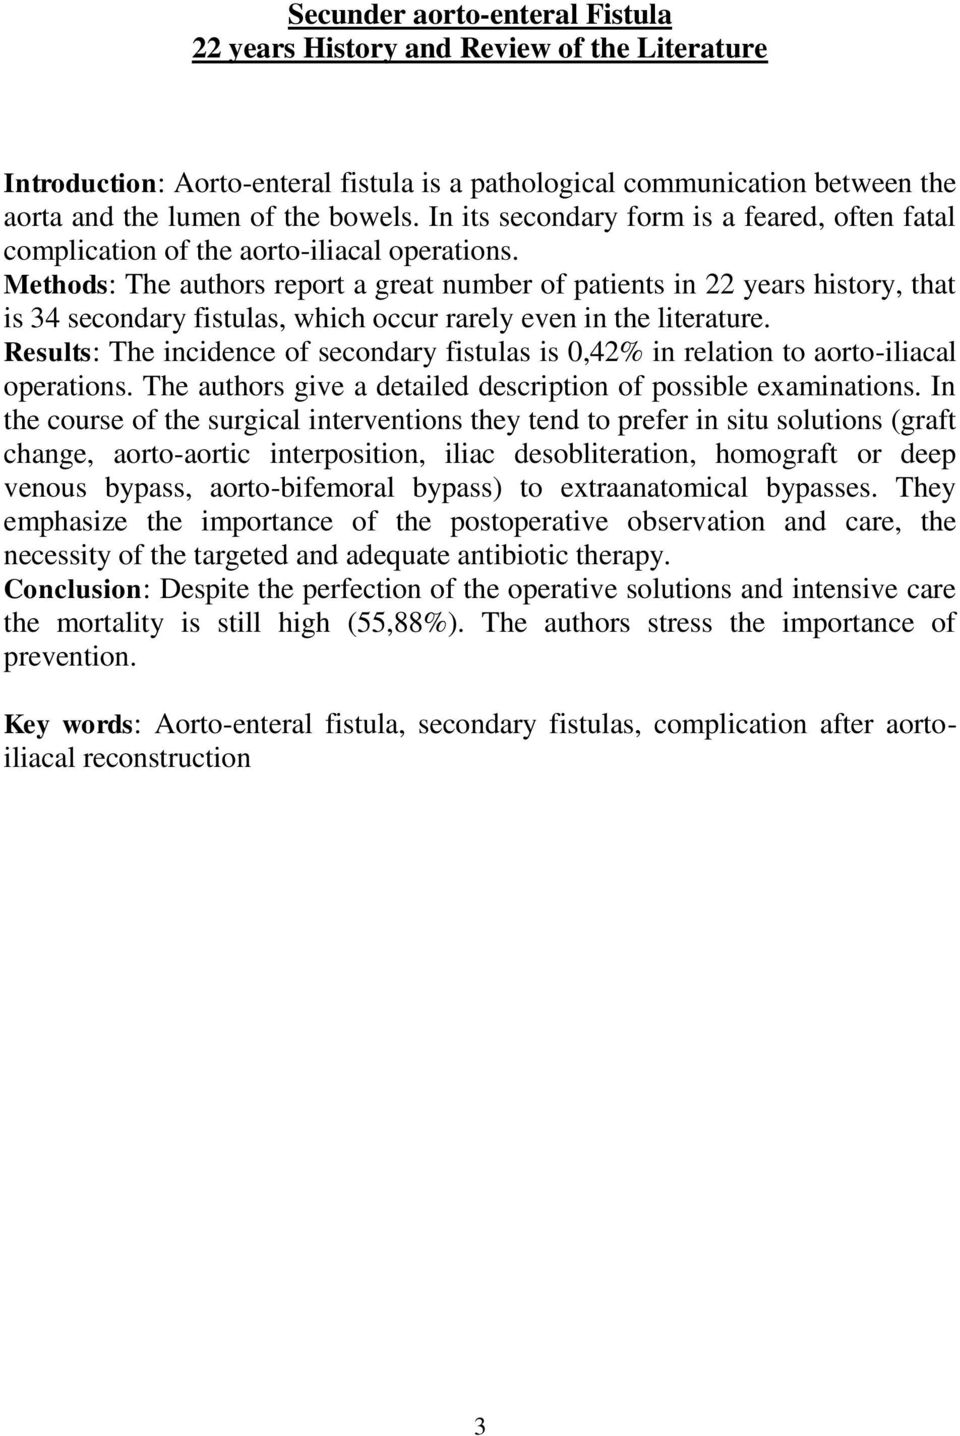 Methods: The authors report a great number of patients in 22 years history, that is 34 secondary fistulas, which occur rarely even in the literature.